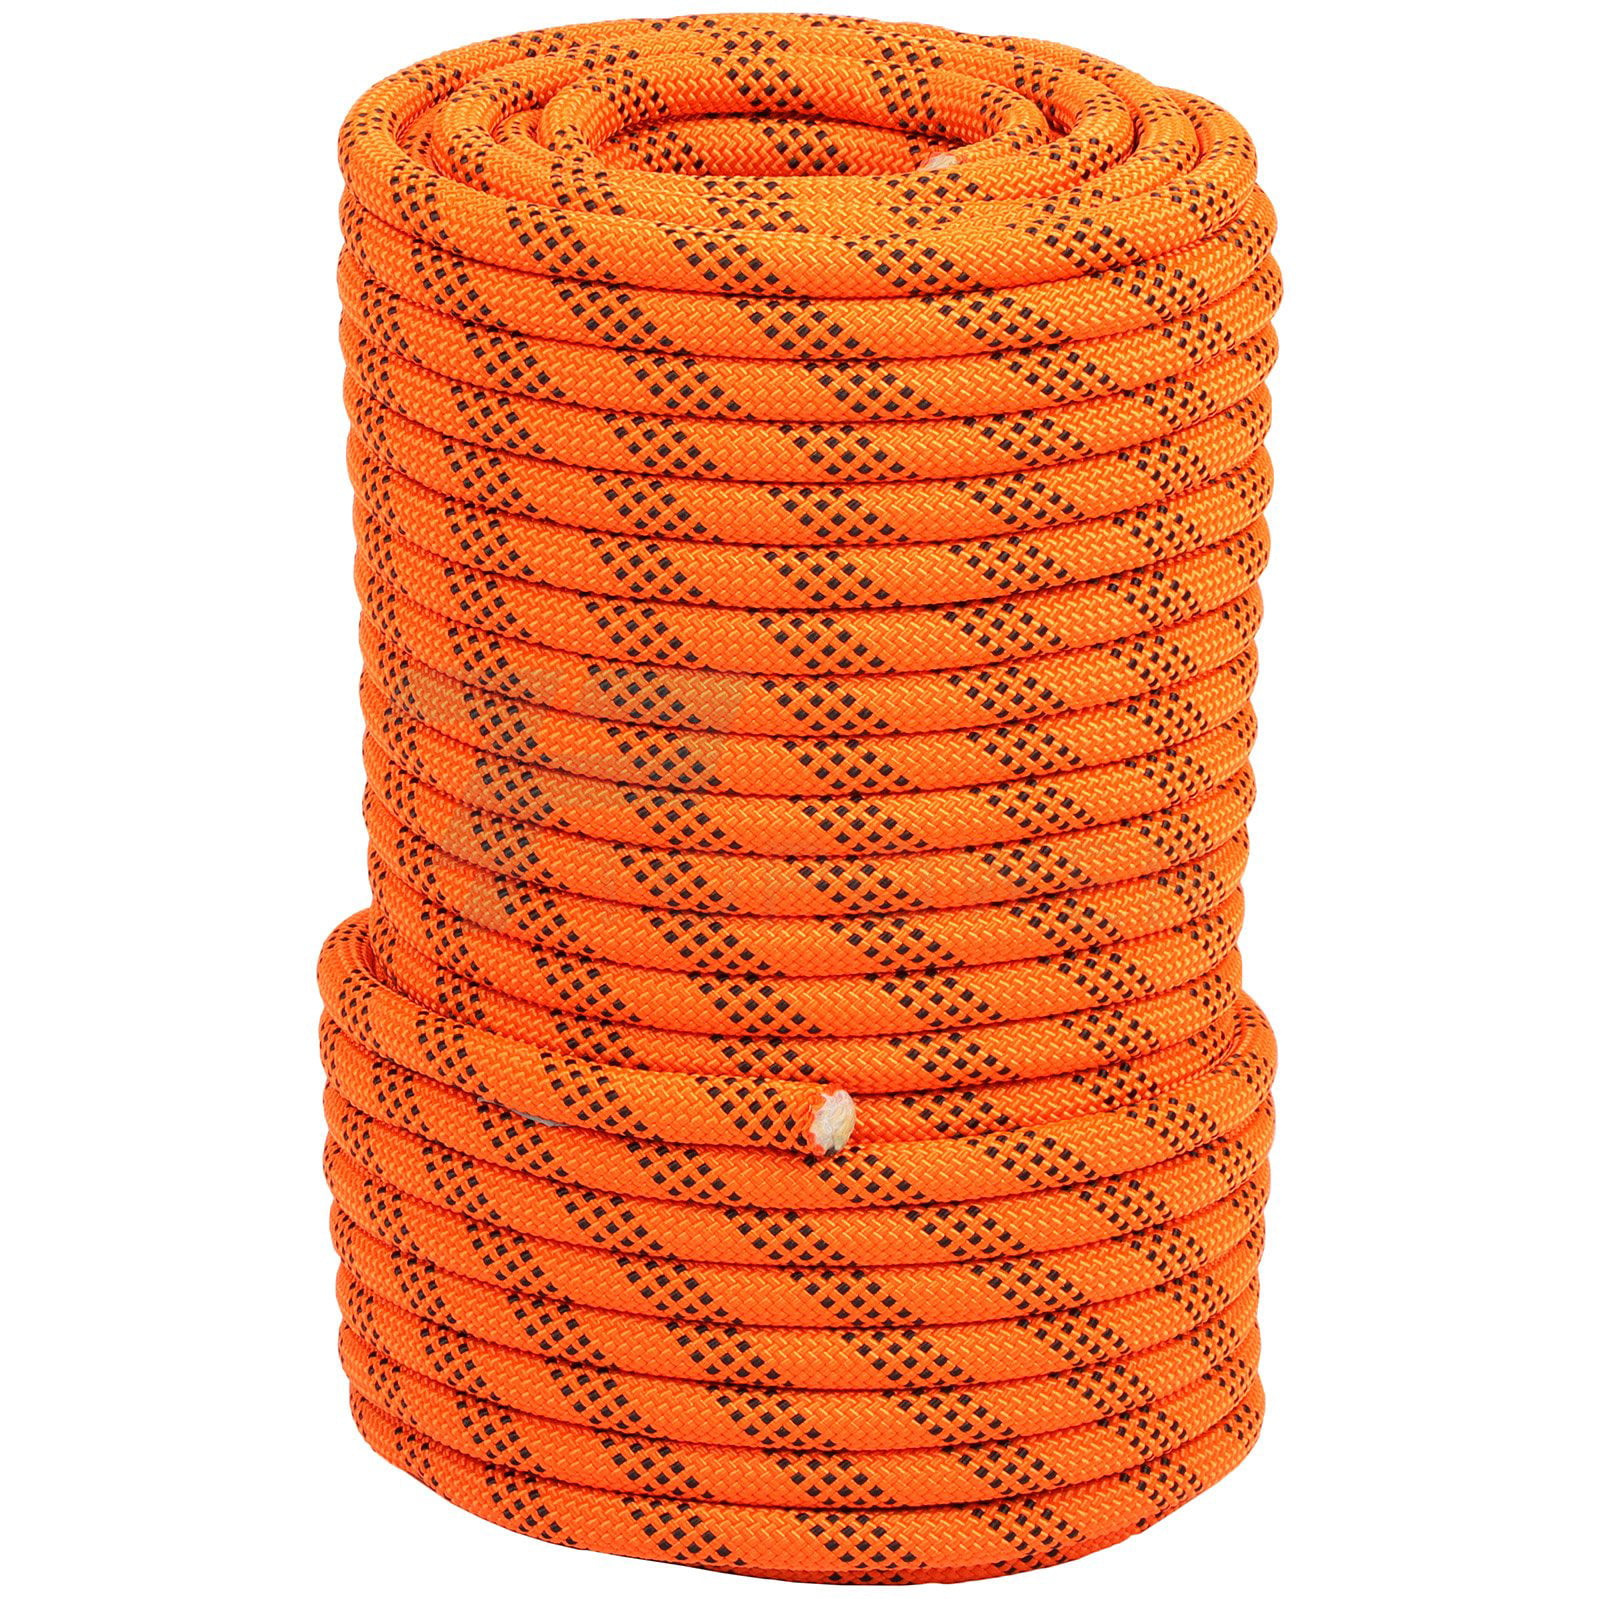 0.43" Double Braid Polyester Rope 150FT 8400 BREAKING STRENGTH 